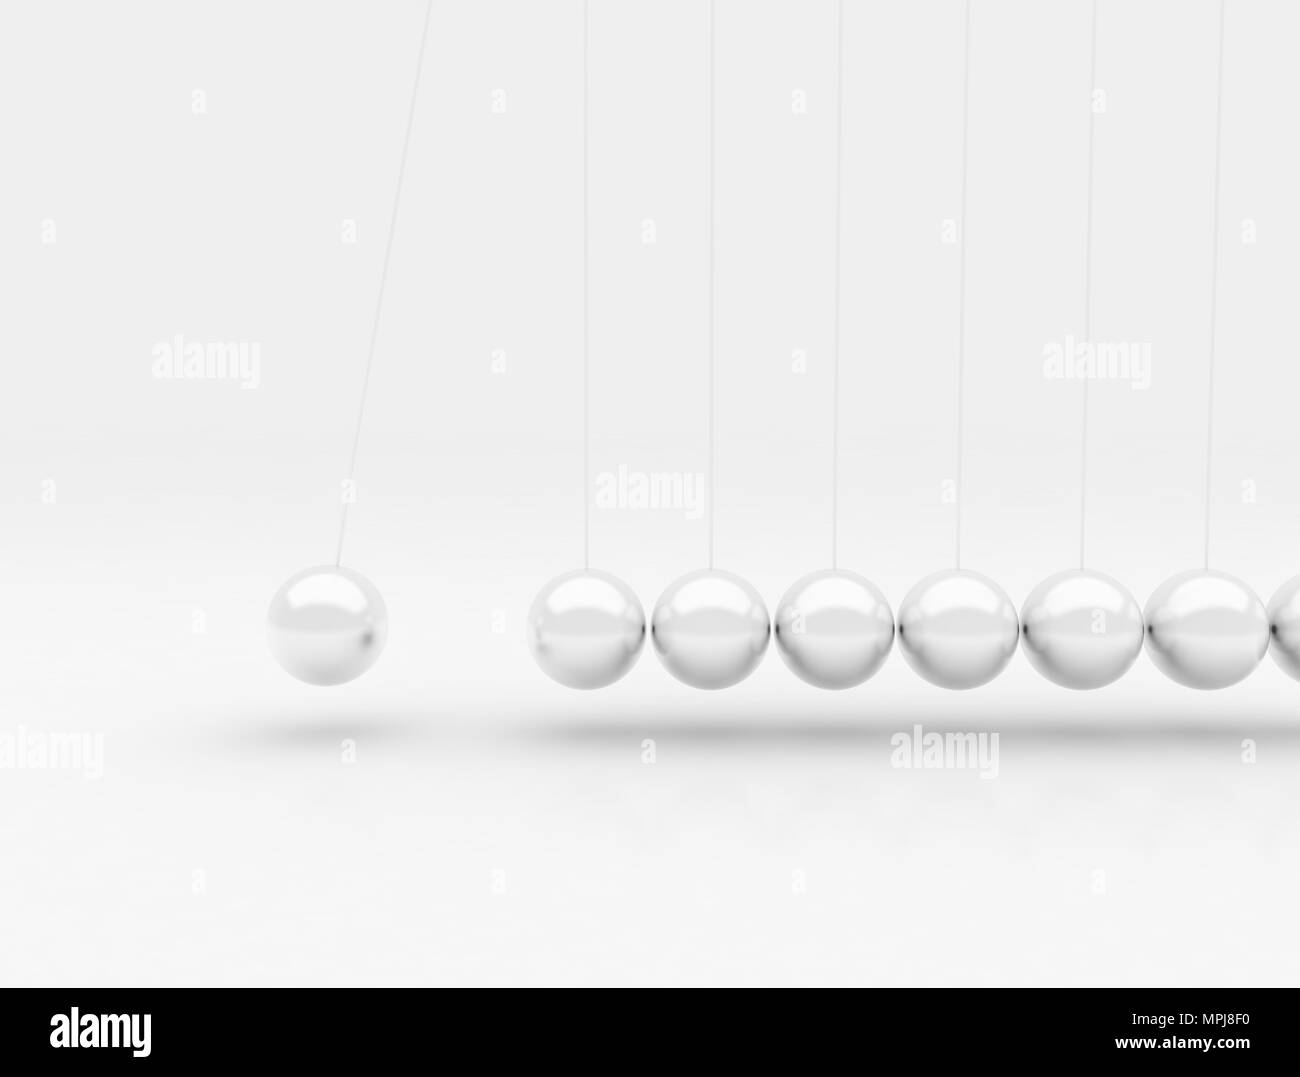 Newtons cradle silver metal balls in motion Stock Photo